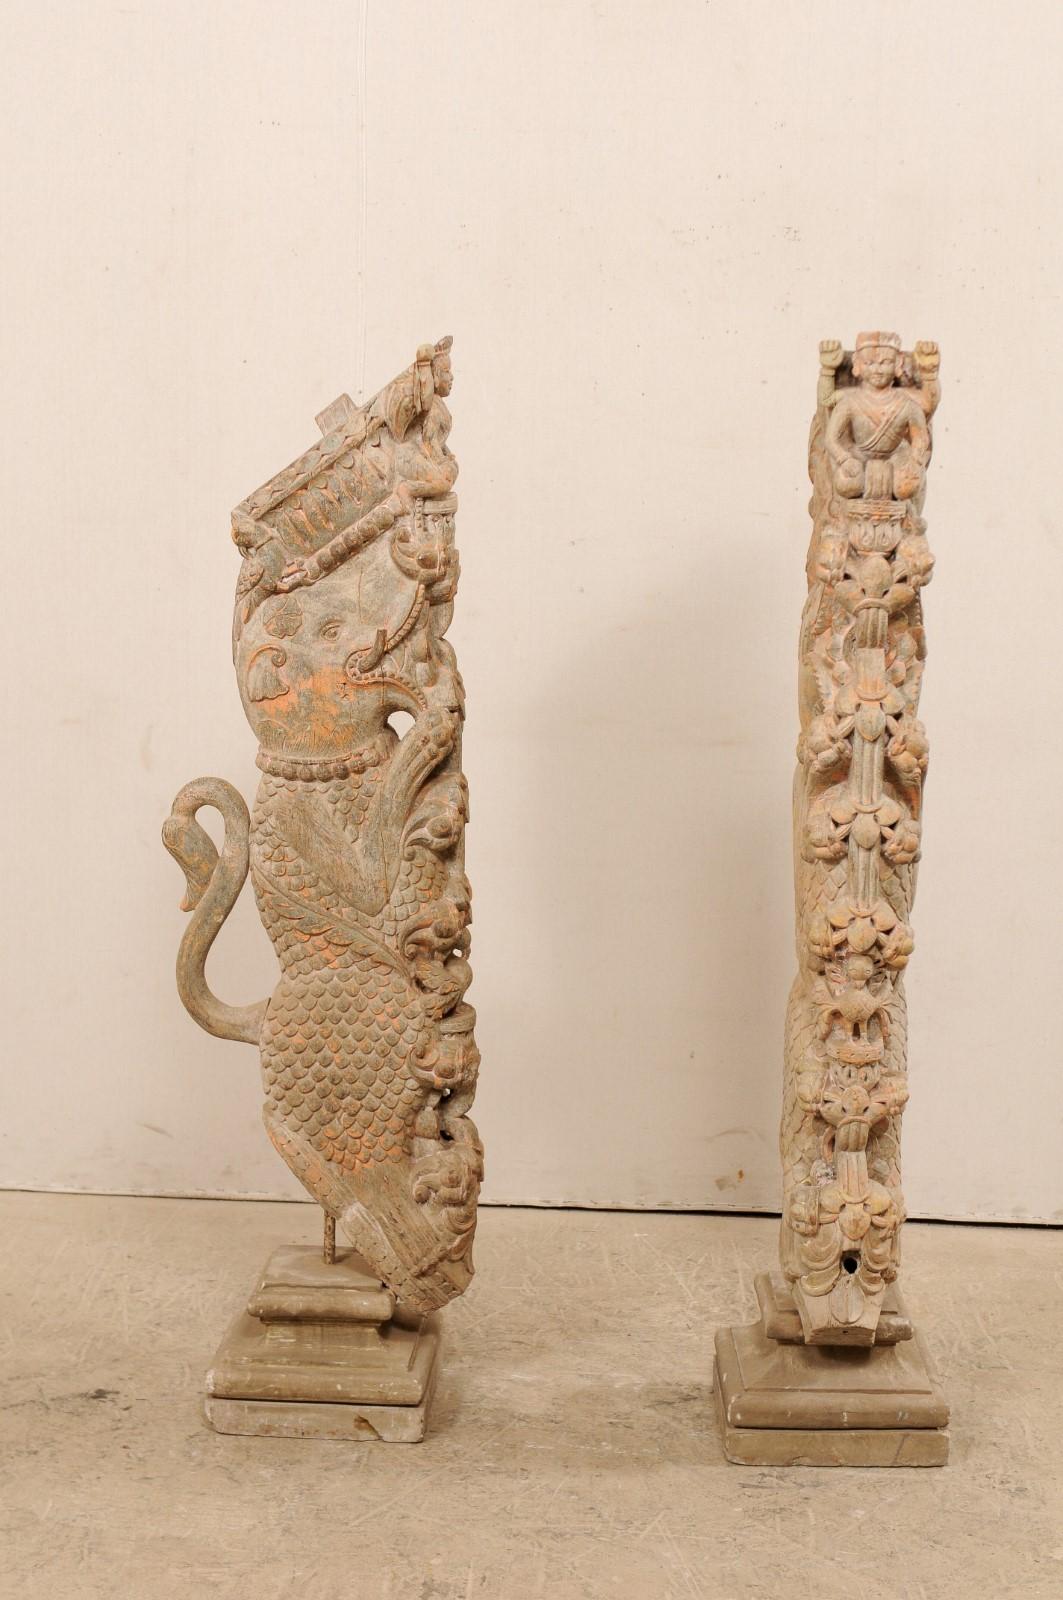 An exquisite pair of hand carved Hindu wooden temple struts, mounted on stone bases, from the 19th century. This pair of antique temple struts from S. India are magnificently carved with depiction of a scaled elephant kneeling serenely on a tower of